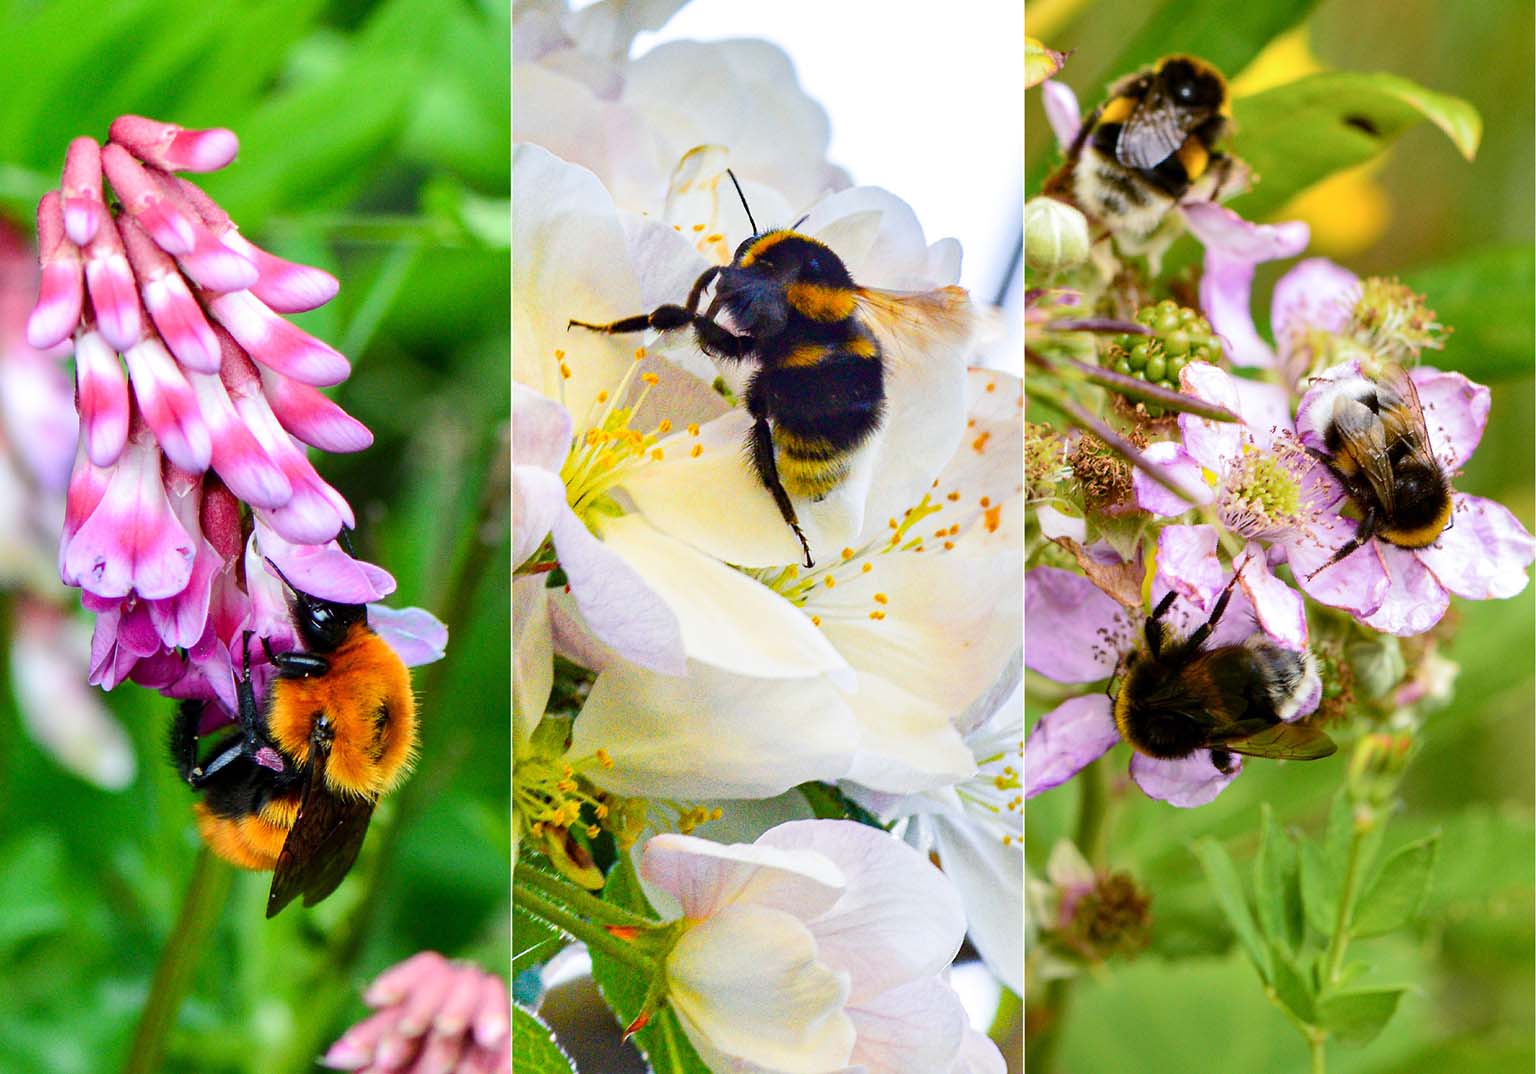 Three pictures of wild bees on flowers: the endangered giant Patagonian bumblebee (Bombus dahlbomii) on left, the large garden bumblebee (Bombus ruderatus) center, and the buff-tailed bumblebee (Bombus terrestris) on right.